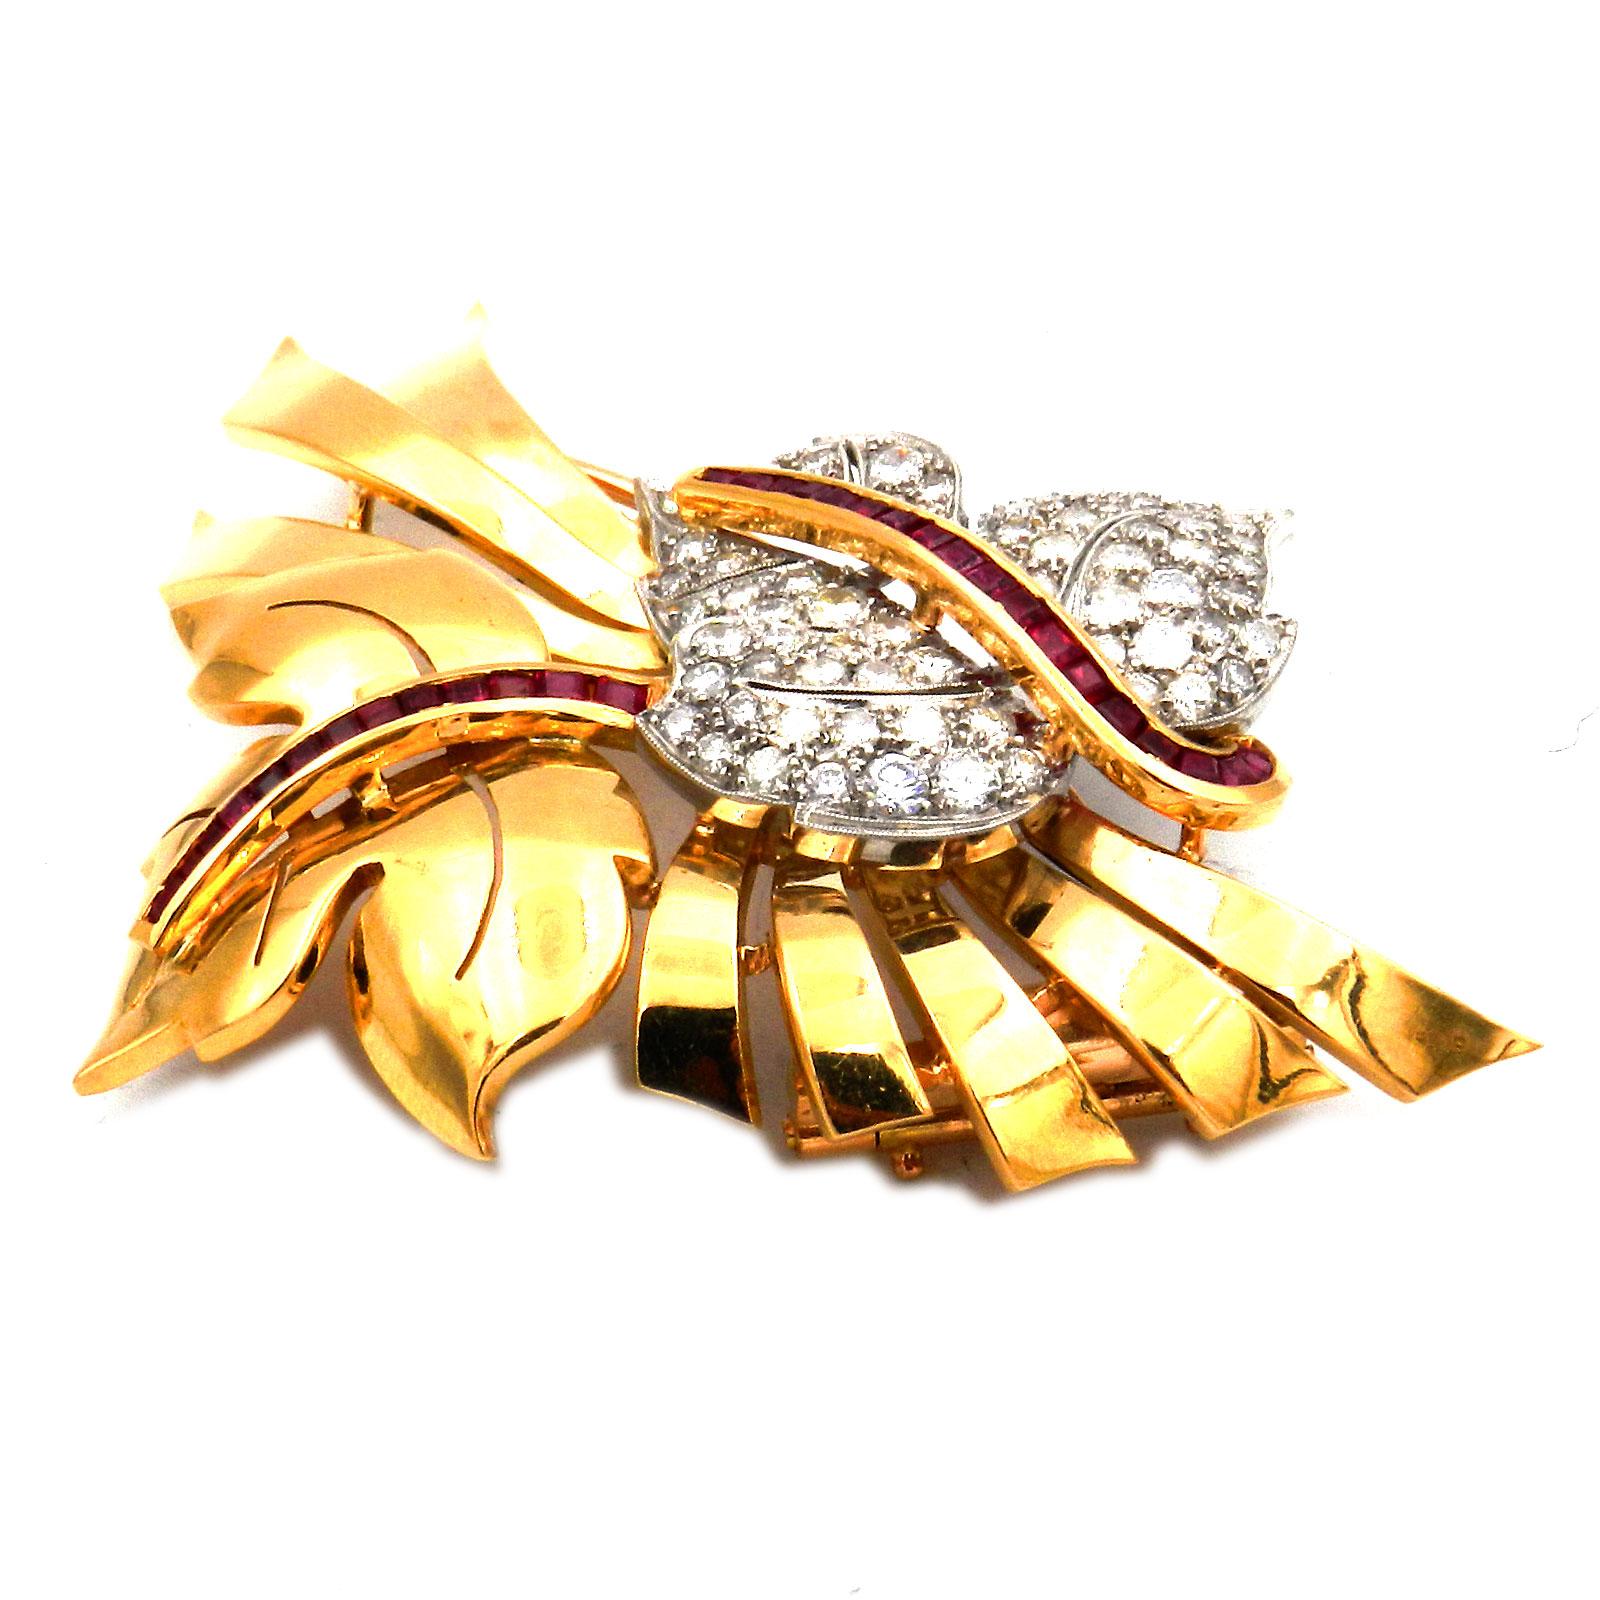 Retro 2.1 ct Diamond Ruby Leaf Brooch in 18K Gold and Platinum circa 1945

Very representative diamond brooch, naturalistically designed in the form of two superimposed maple leaves, whereby the smaller one is set with 69 radiant brilliant-cut